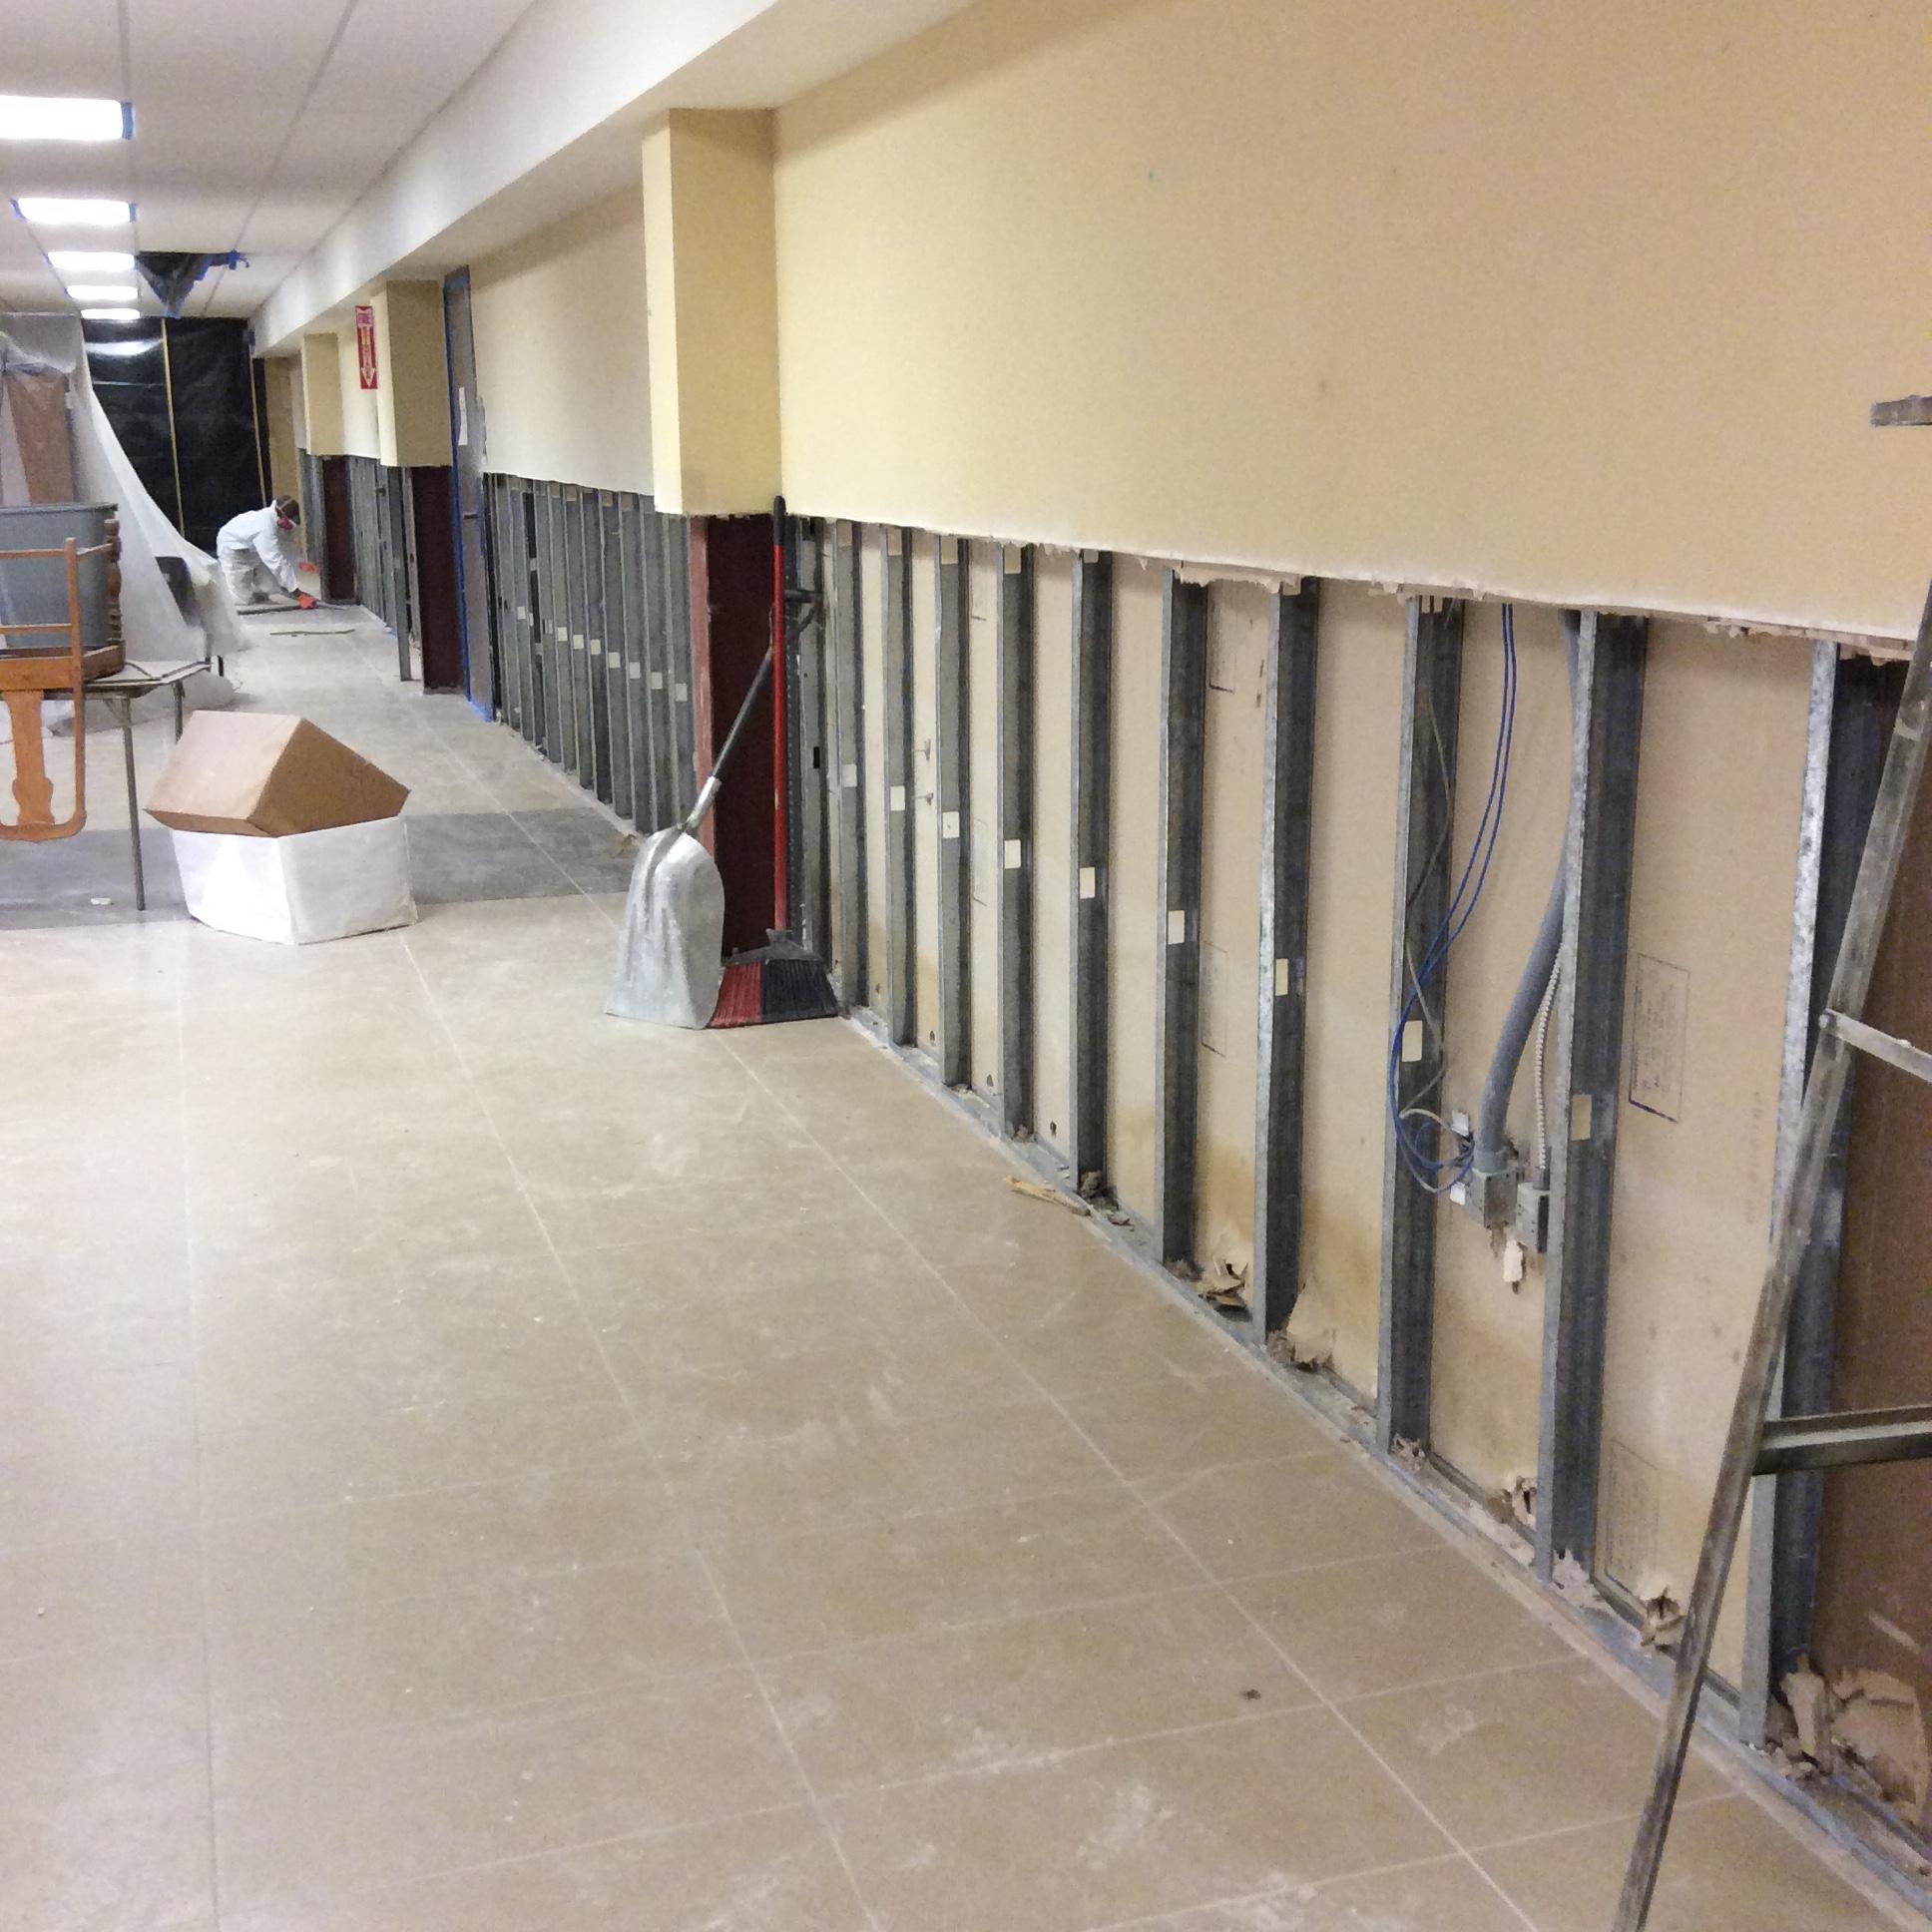 Flood cuts during the restoration process after a large commercial loss.